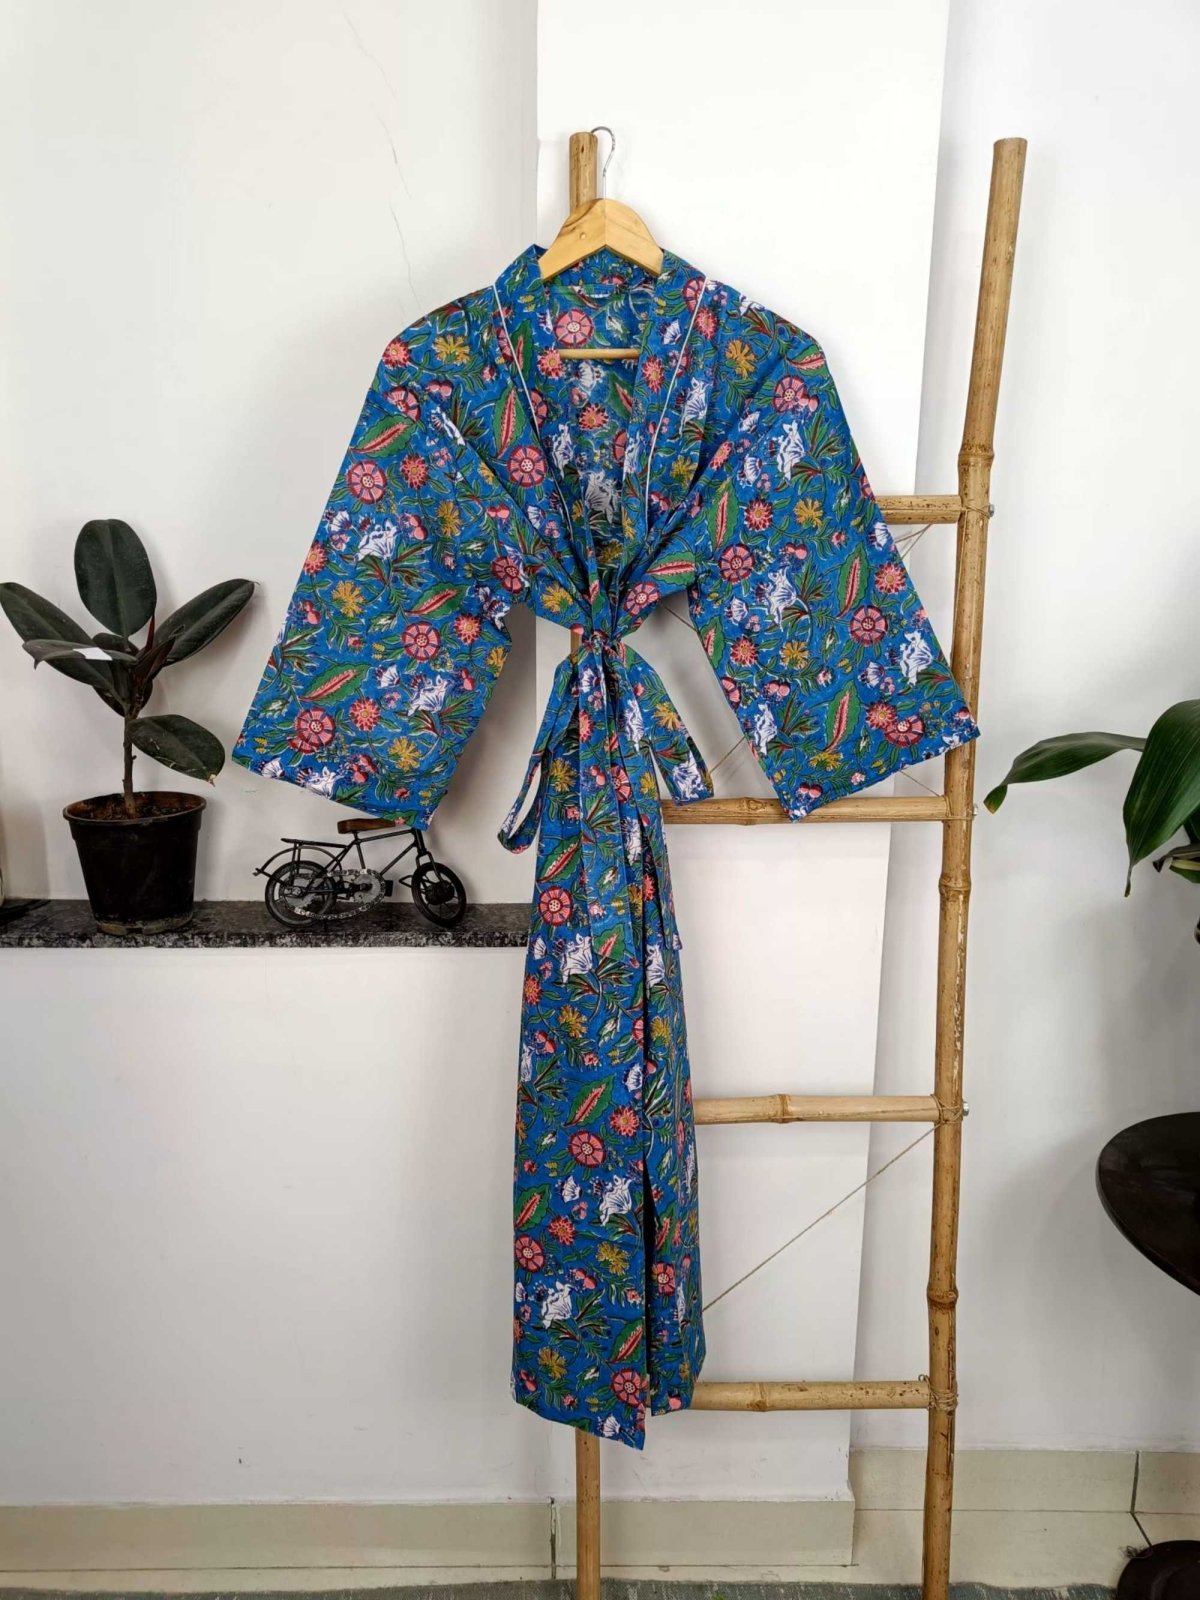 Pure Cotton Spring Summer Boho House Robe Kimono Indian Handblock Jaipur Indian Dress Blue Red floral Luxury Beach Holiday Wear Yacht Cover Up - The Eastern Loom